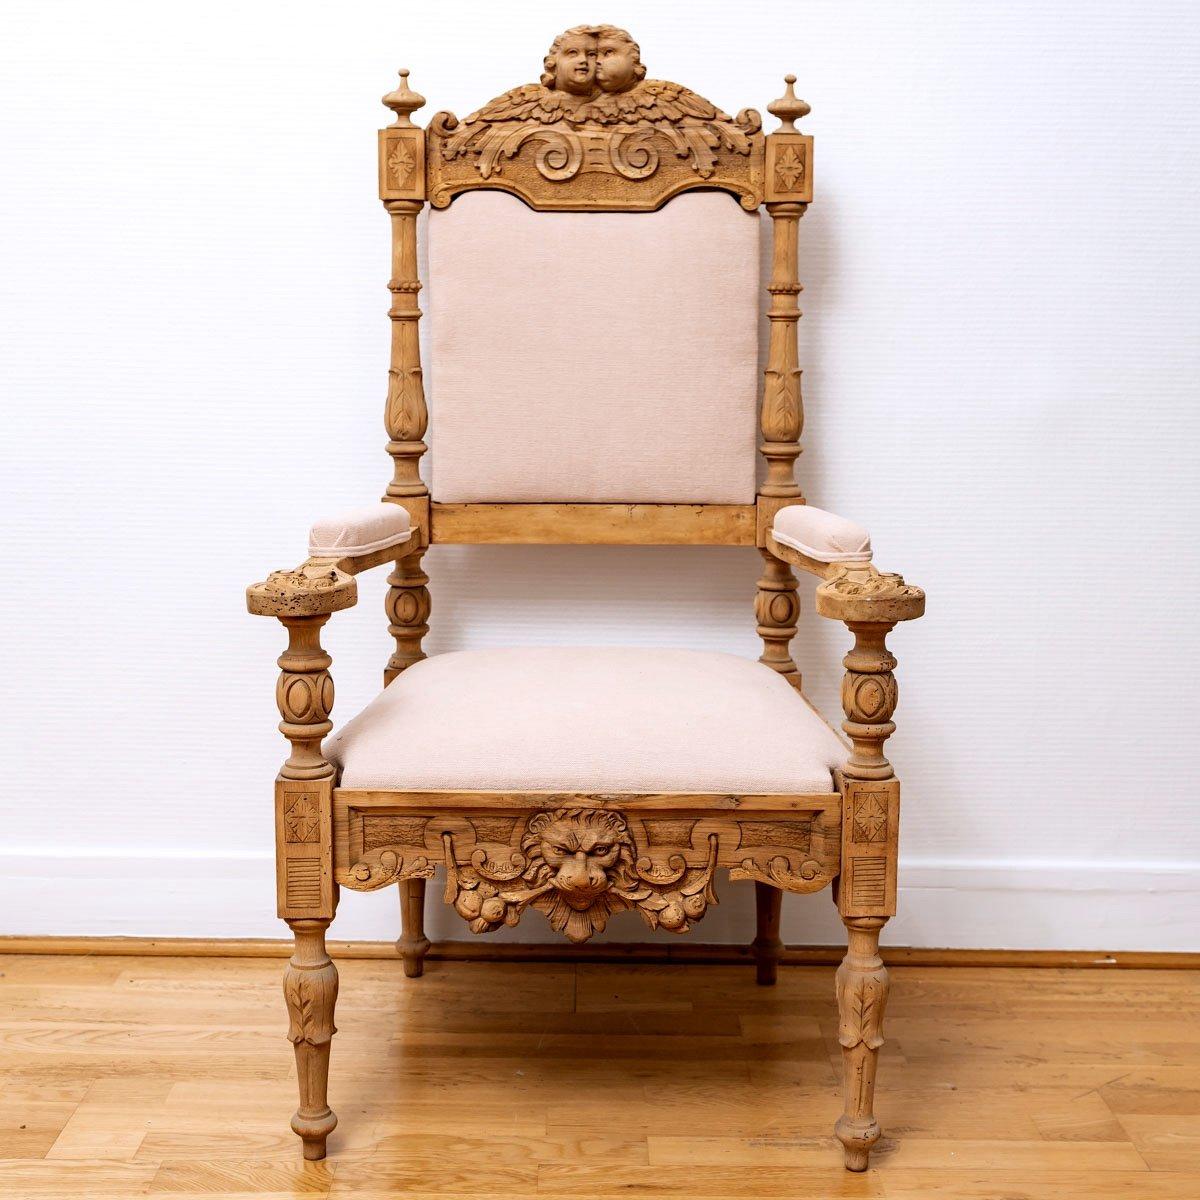 Charming armchair with armrests in solid walnut.
This beautiful piece of furniture, a unique part of a complete living room, was made in Italy, in the region of Piedmont, whose many places still offer a testimony of the past. History has left its